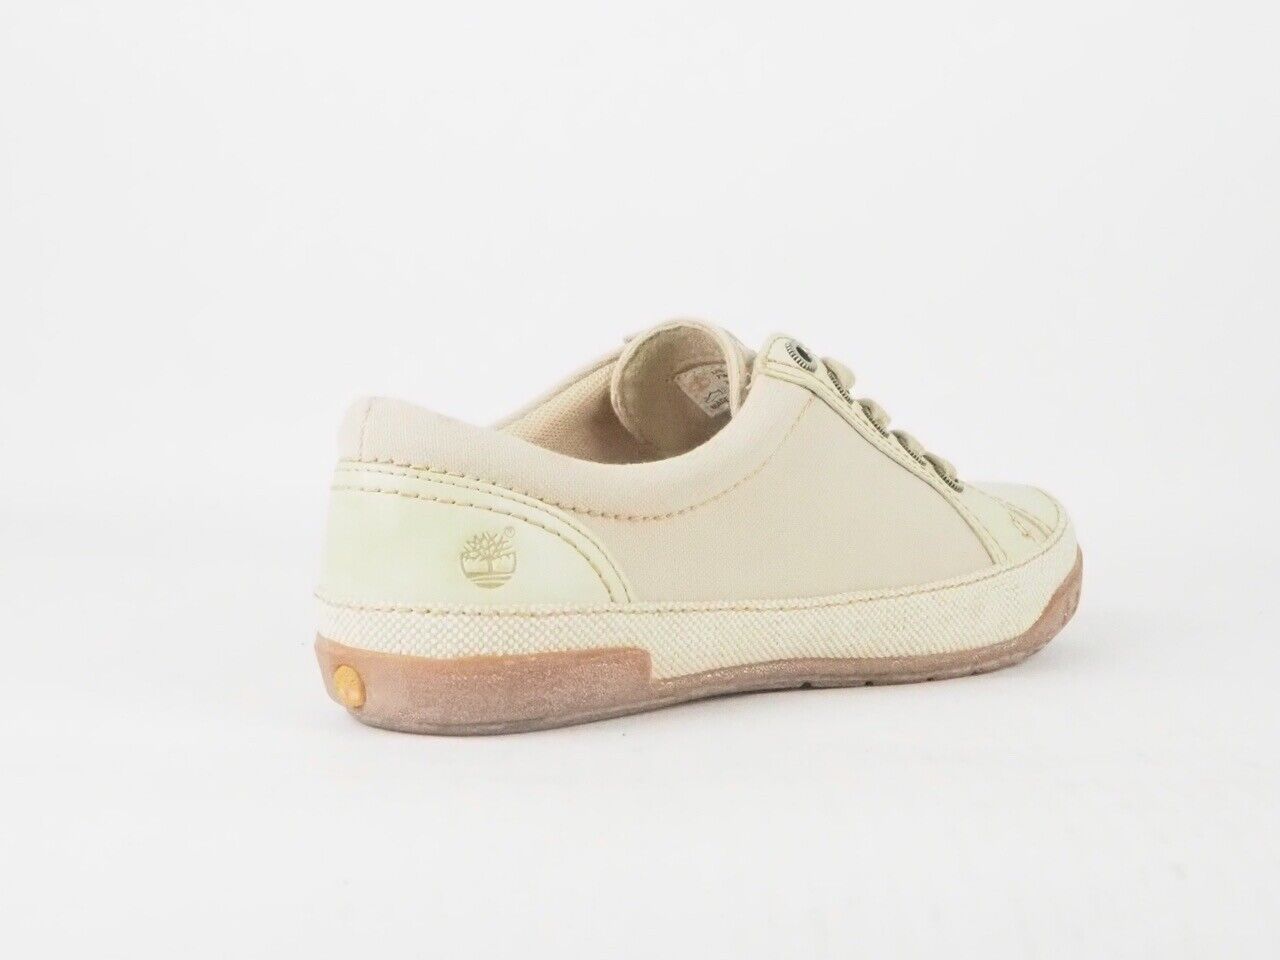 Womens Timberland Northport Oxford 3963R Beige Leather Flat Laced Casual Shoes